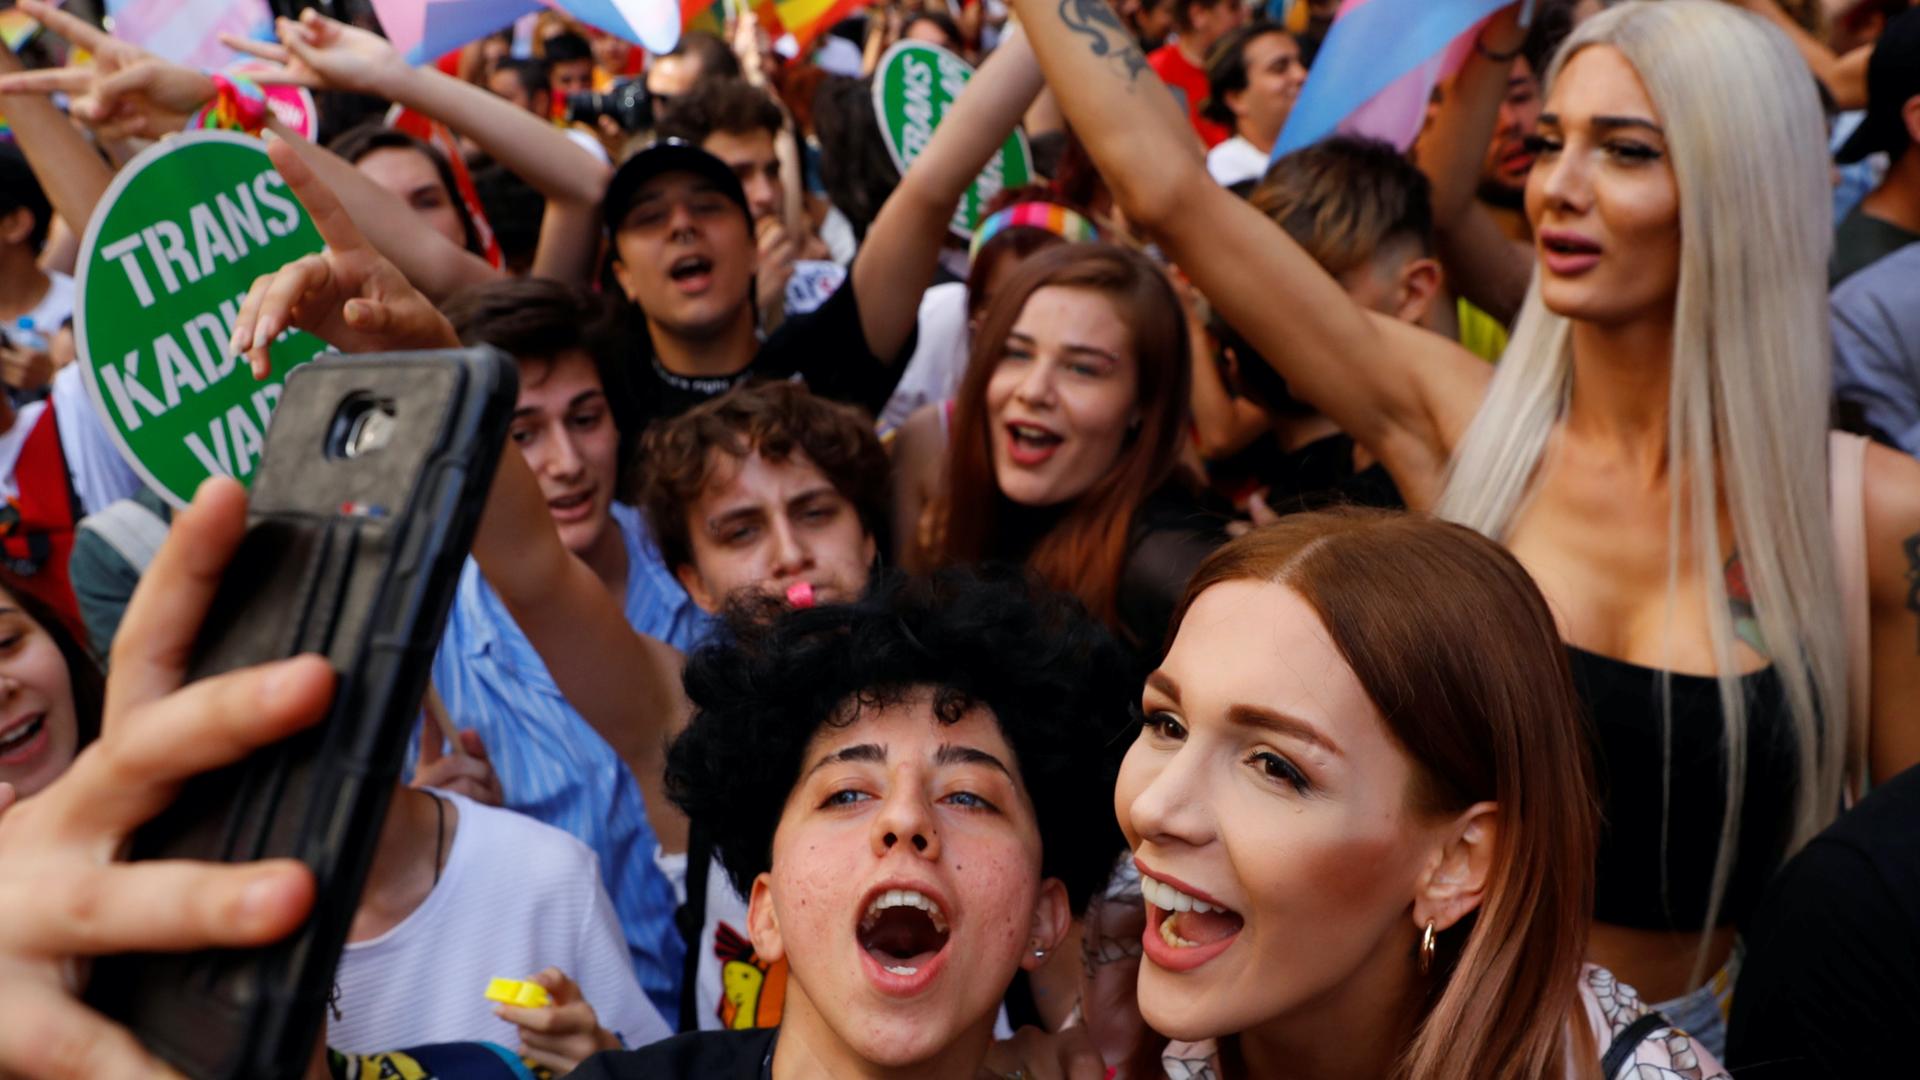 Several people surrounded by rainbow flags in a crowd cheer together in a parade and two people in front take a selfie